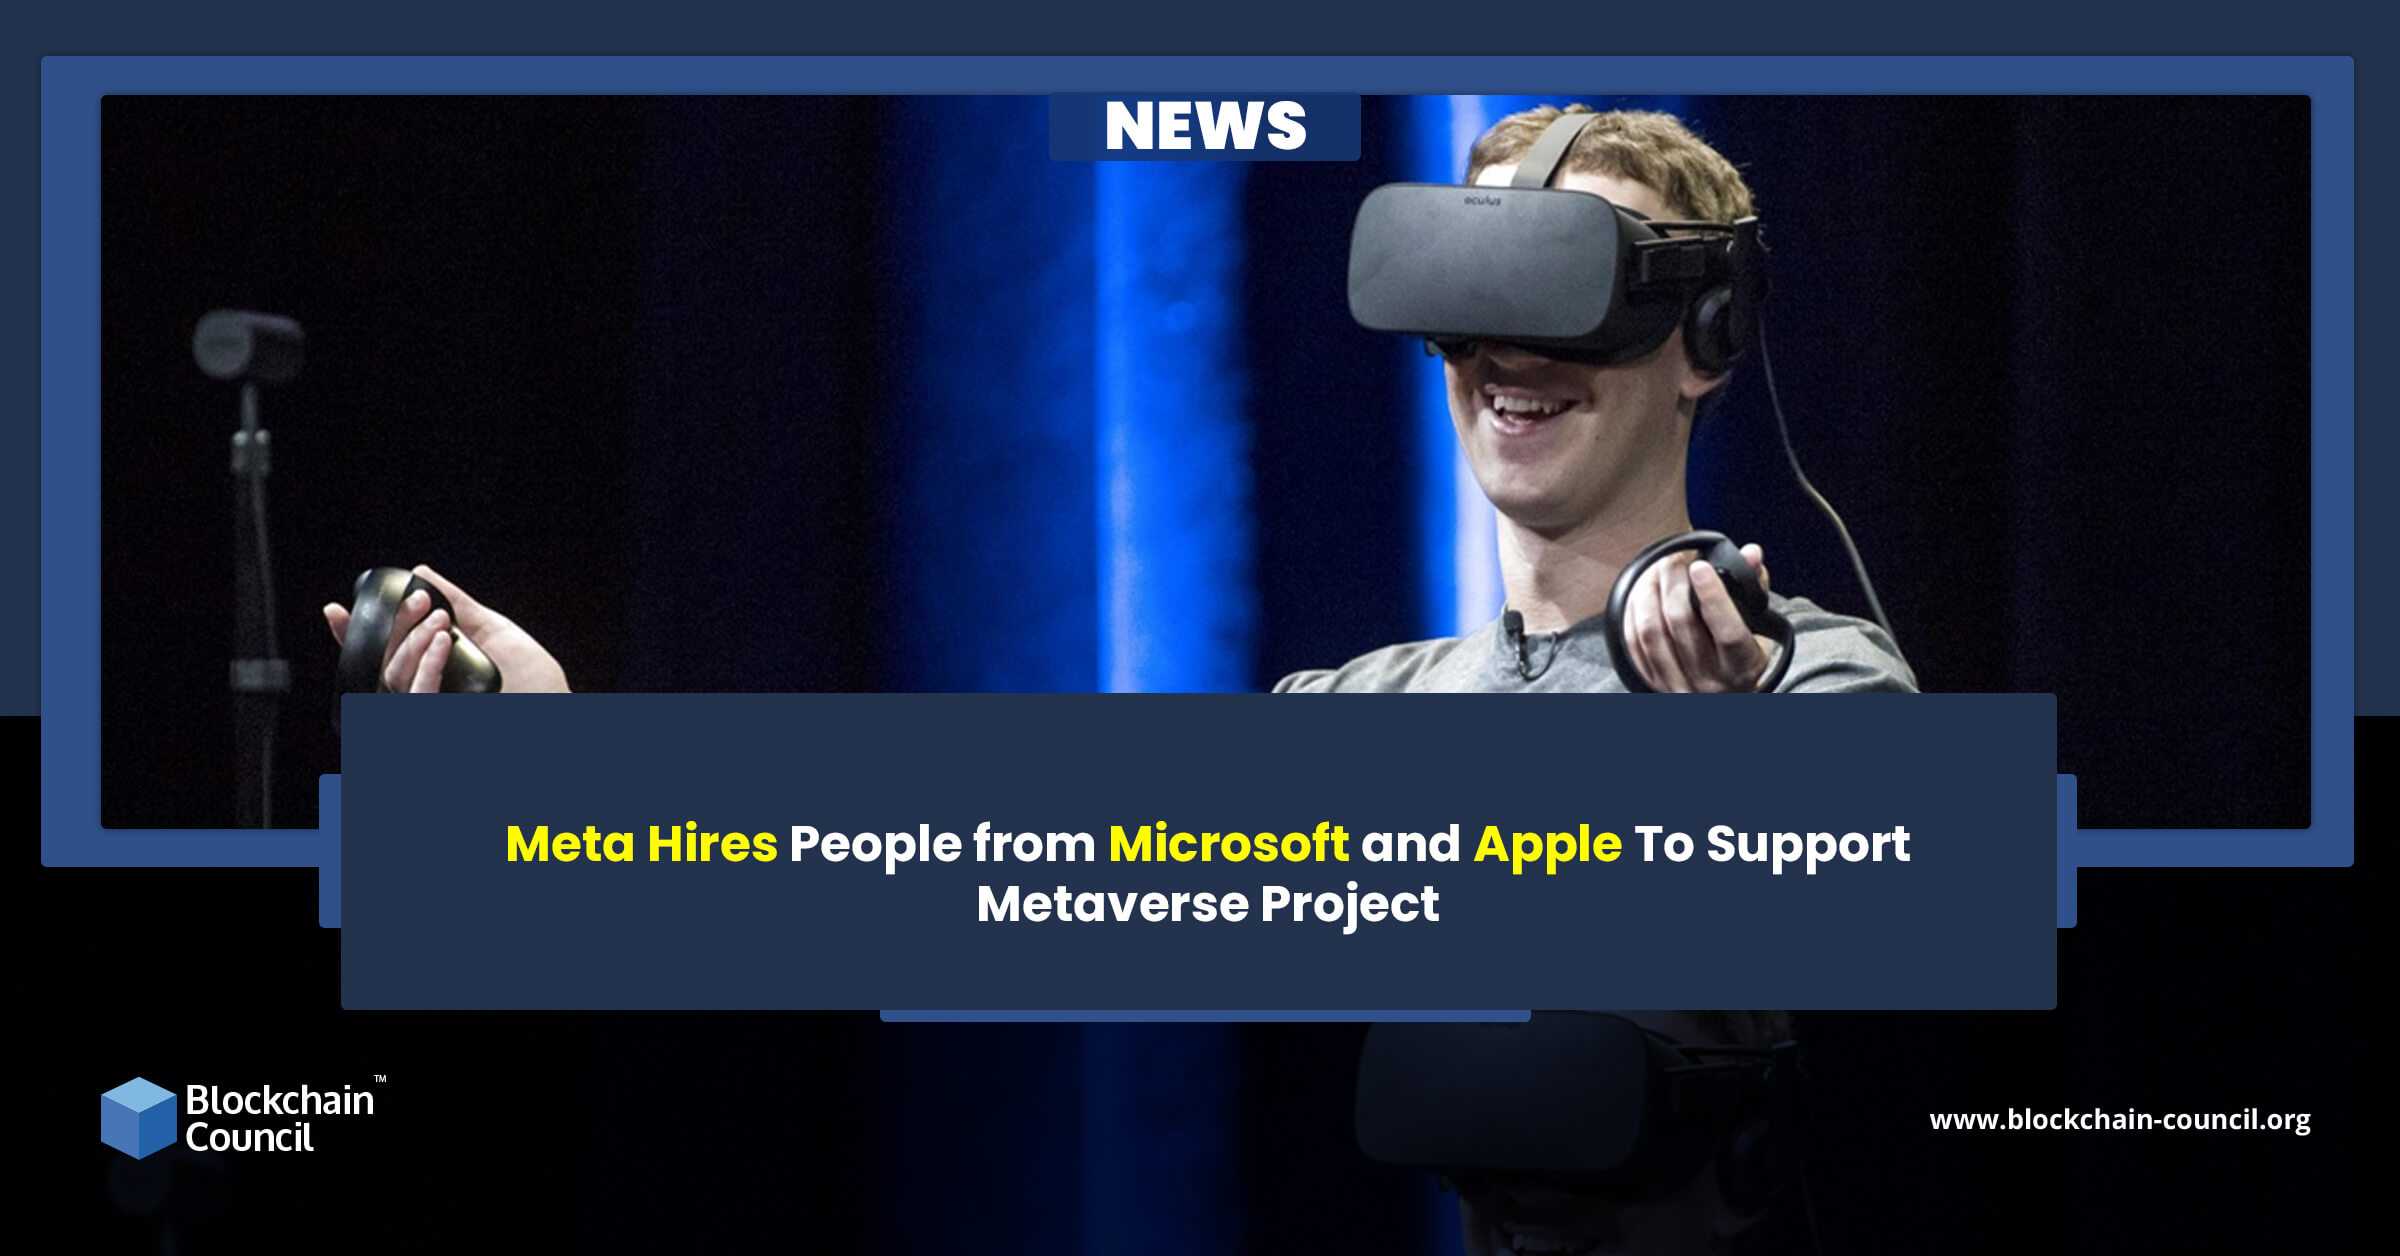 Meta Hires People from Microsoft and Apple To Support Metaverse Project